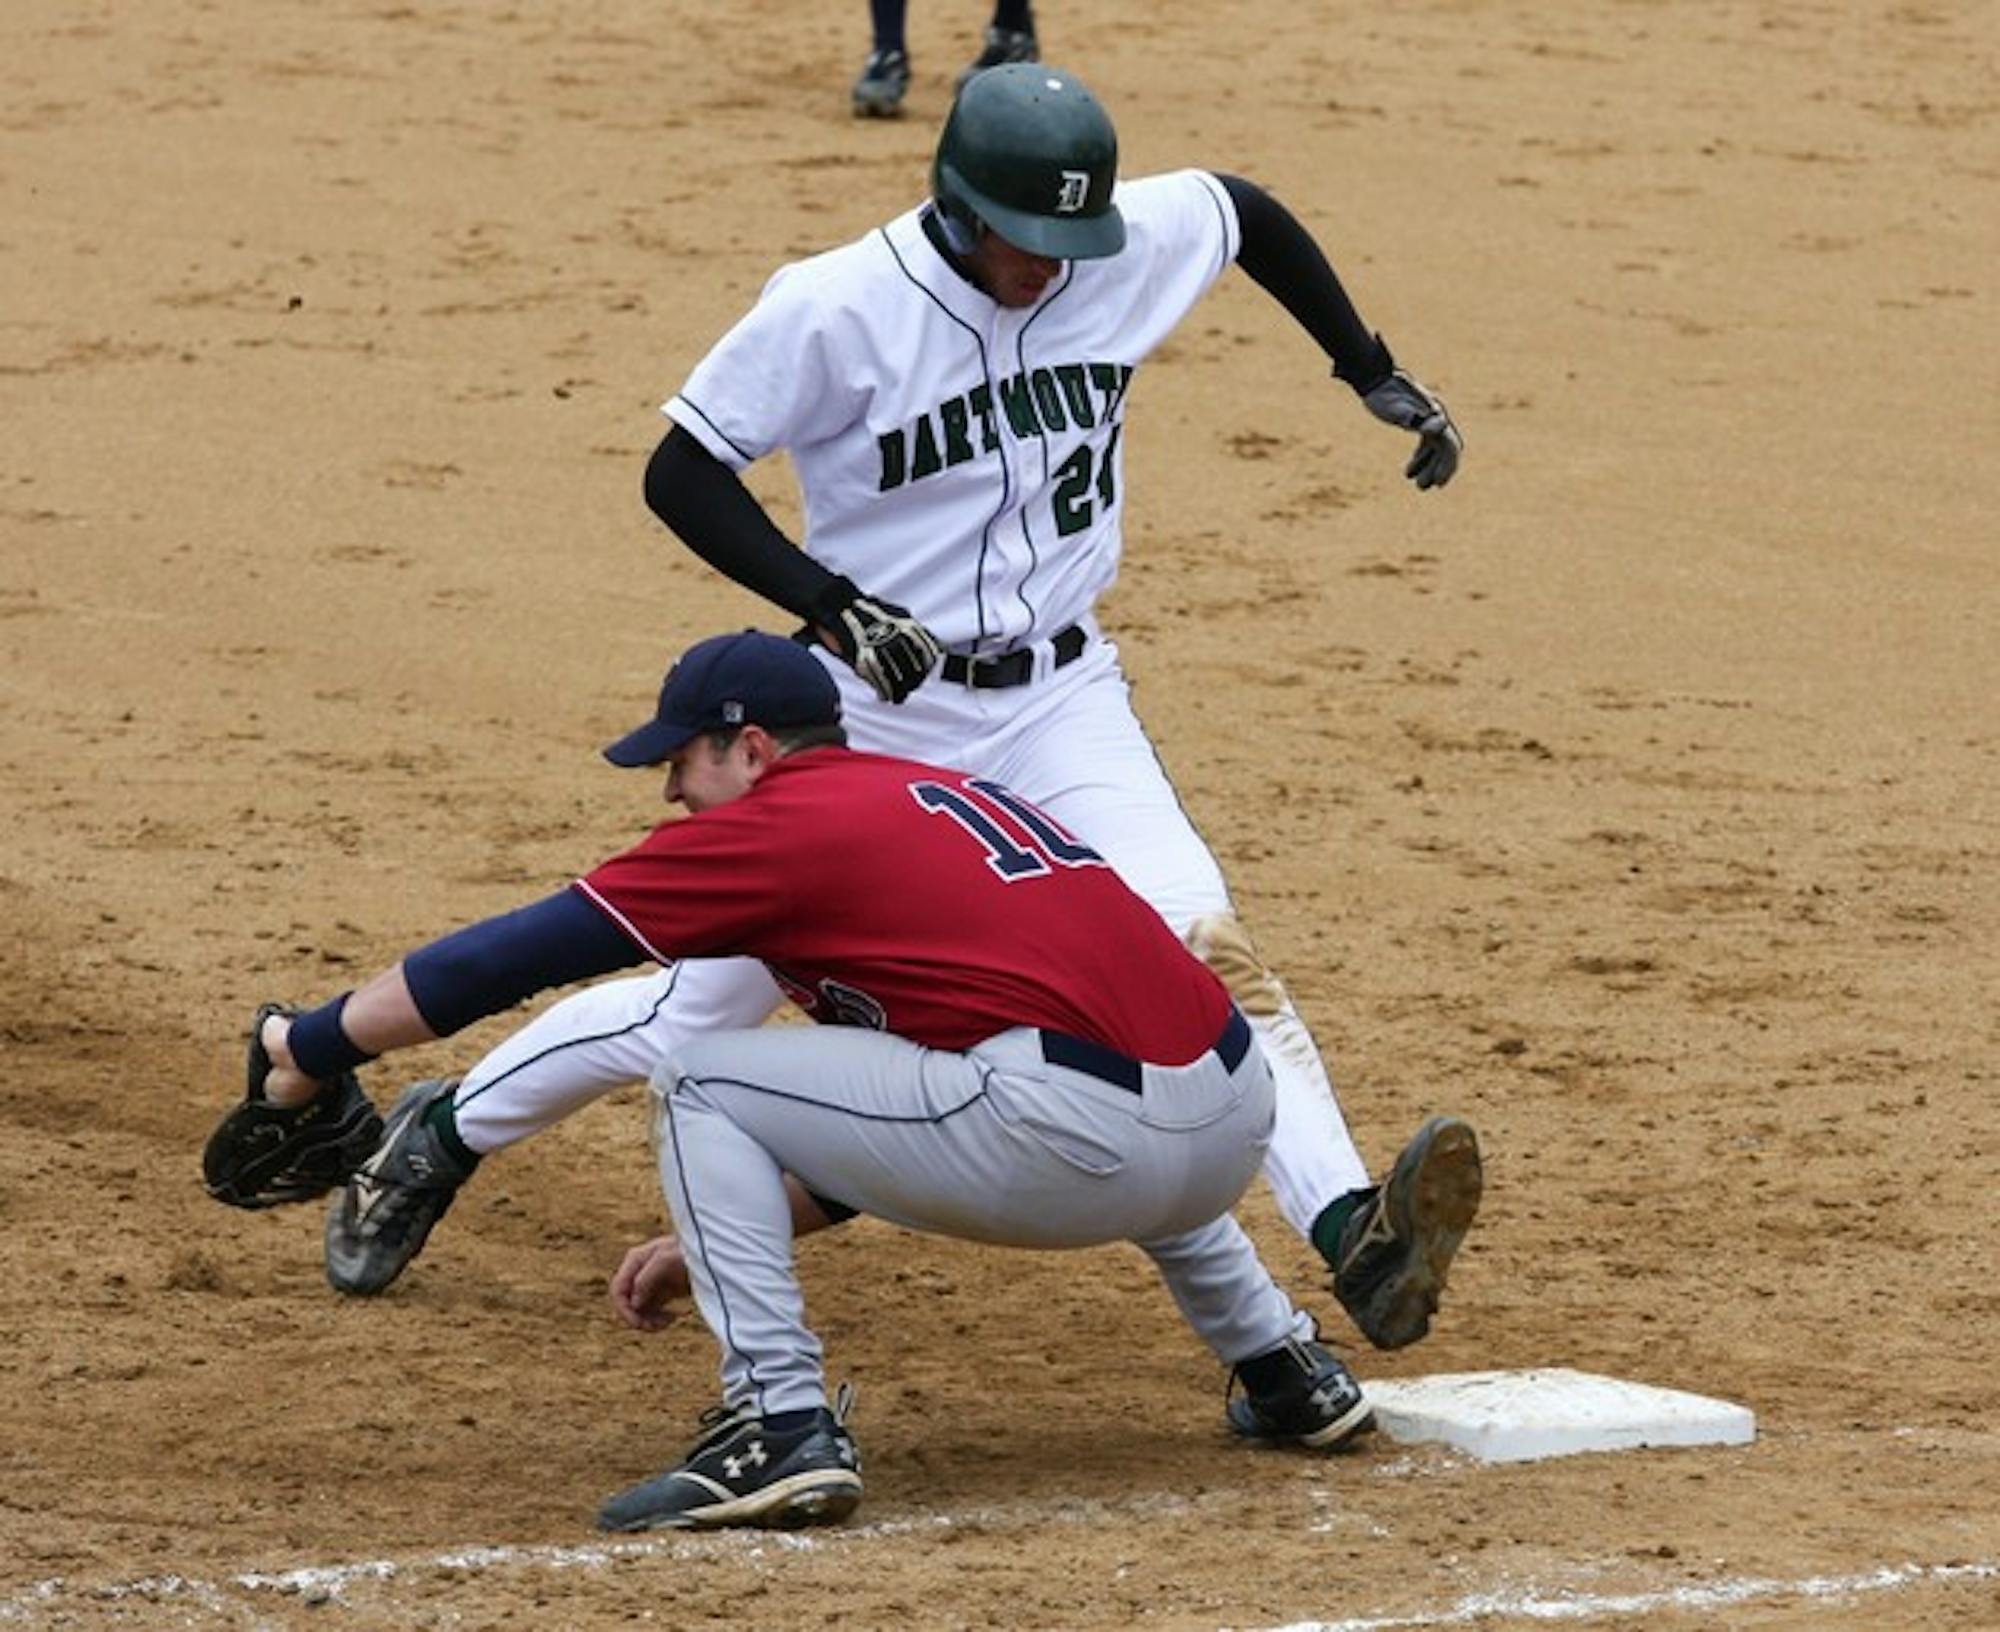 After a strong weekend, Dartmouth's baseball team is 7-1 in the Ivy League.